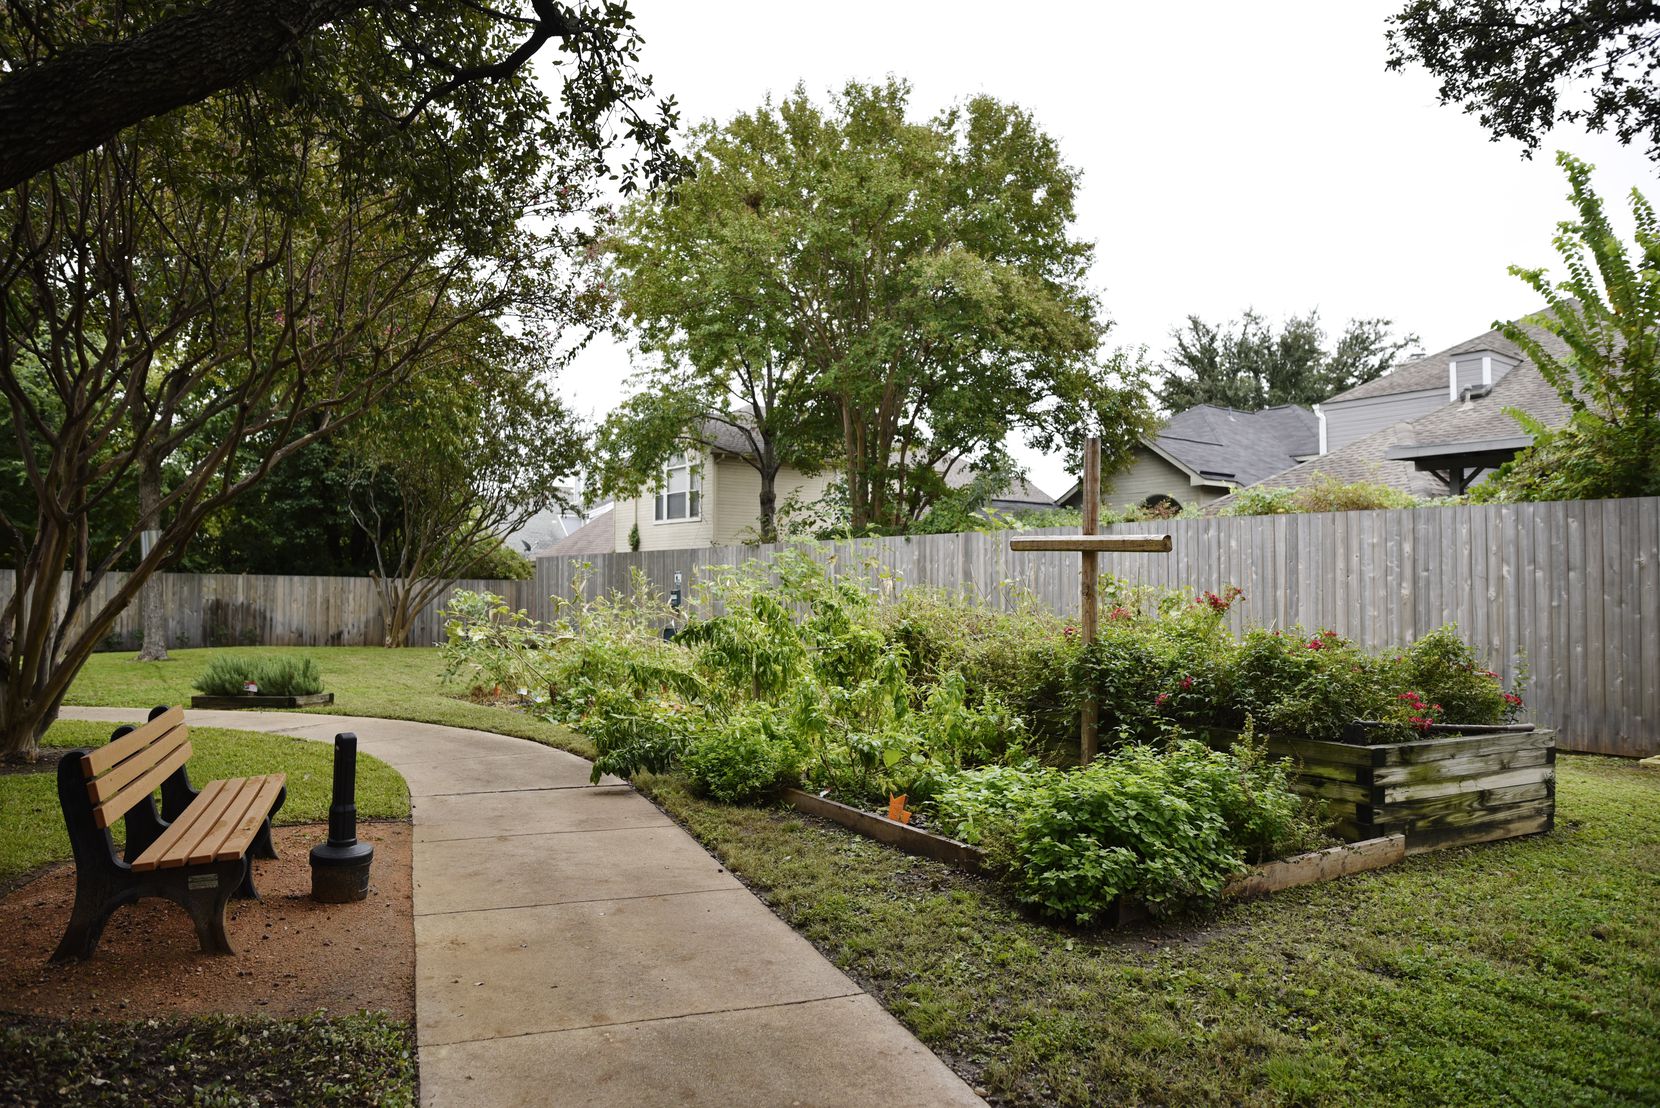 In the courtyard at St. Jude Center residents maintain a garden along a fence line...